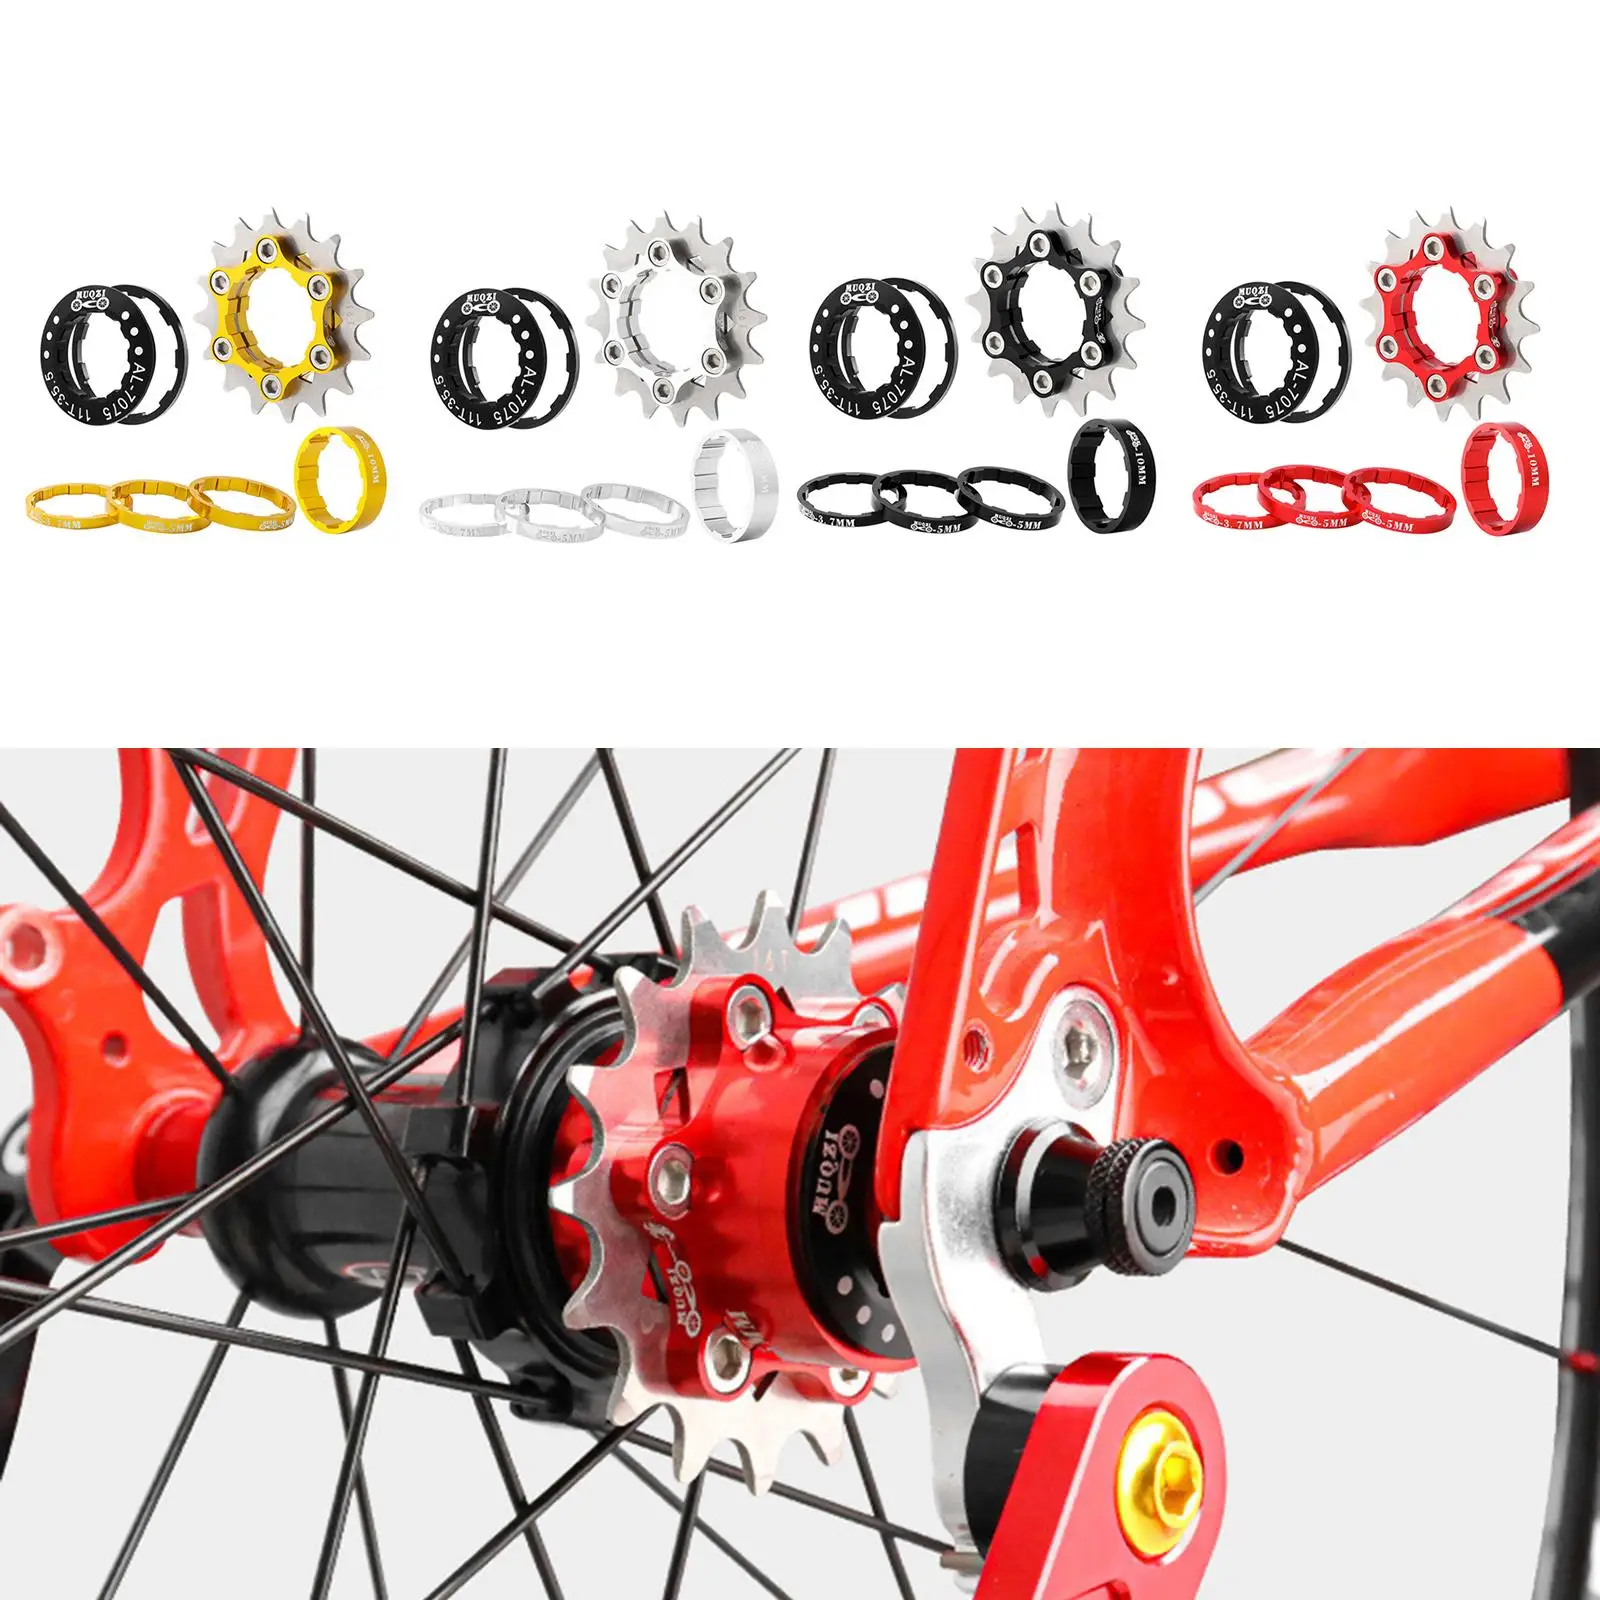 Bicycle 16  Flywheel Set High Strength Aluminum Alloy Cassette Component Removeable Cog Fixed Parts Sprocket Gear for MTB BMX